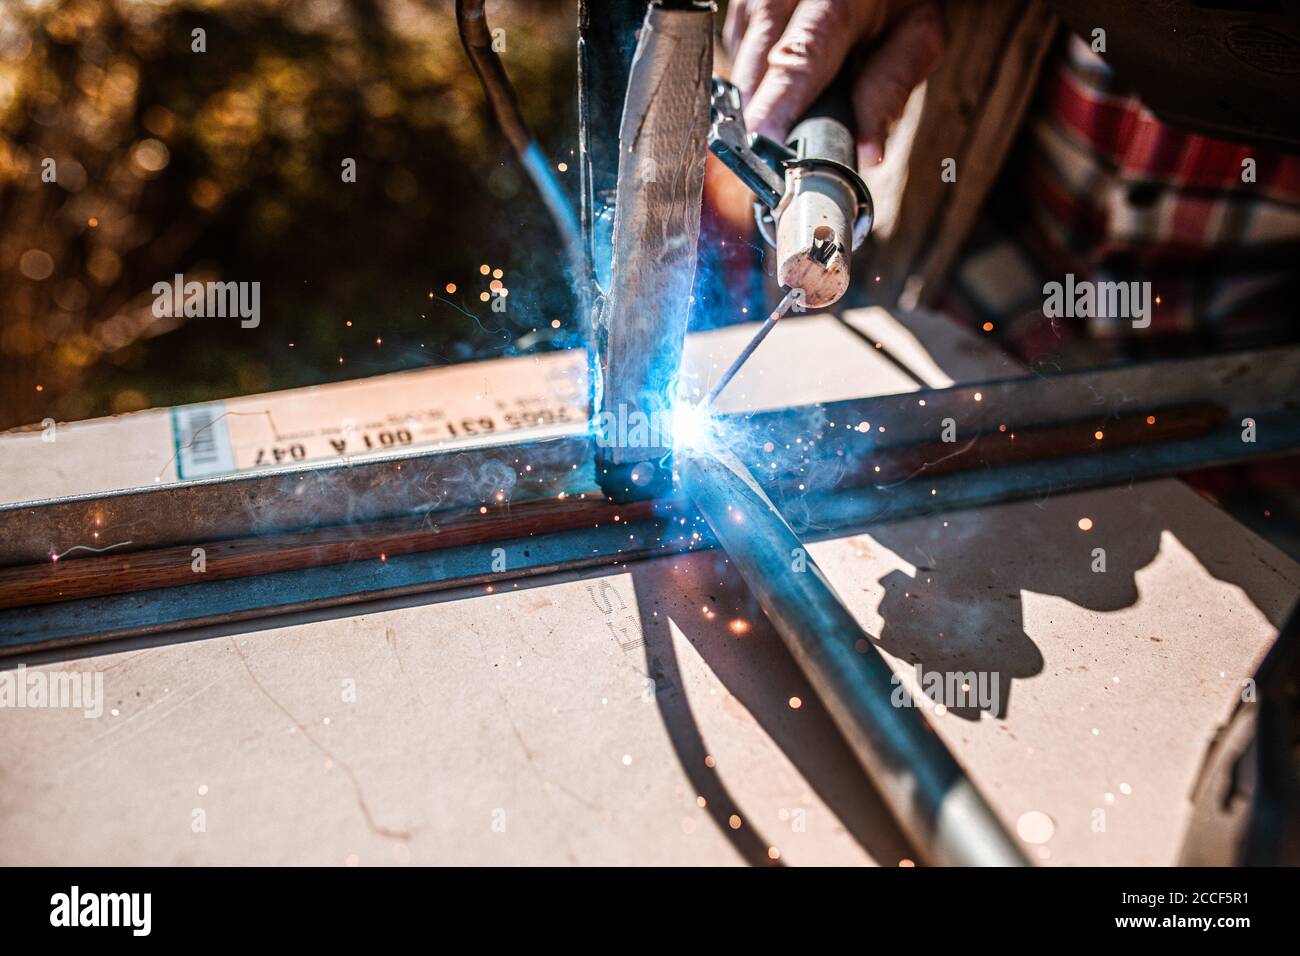 Arc welding on a workpiece with flying sparks, hobby craftsmen Stock Photo